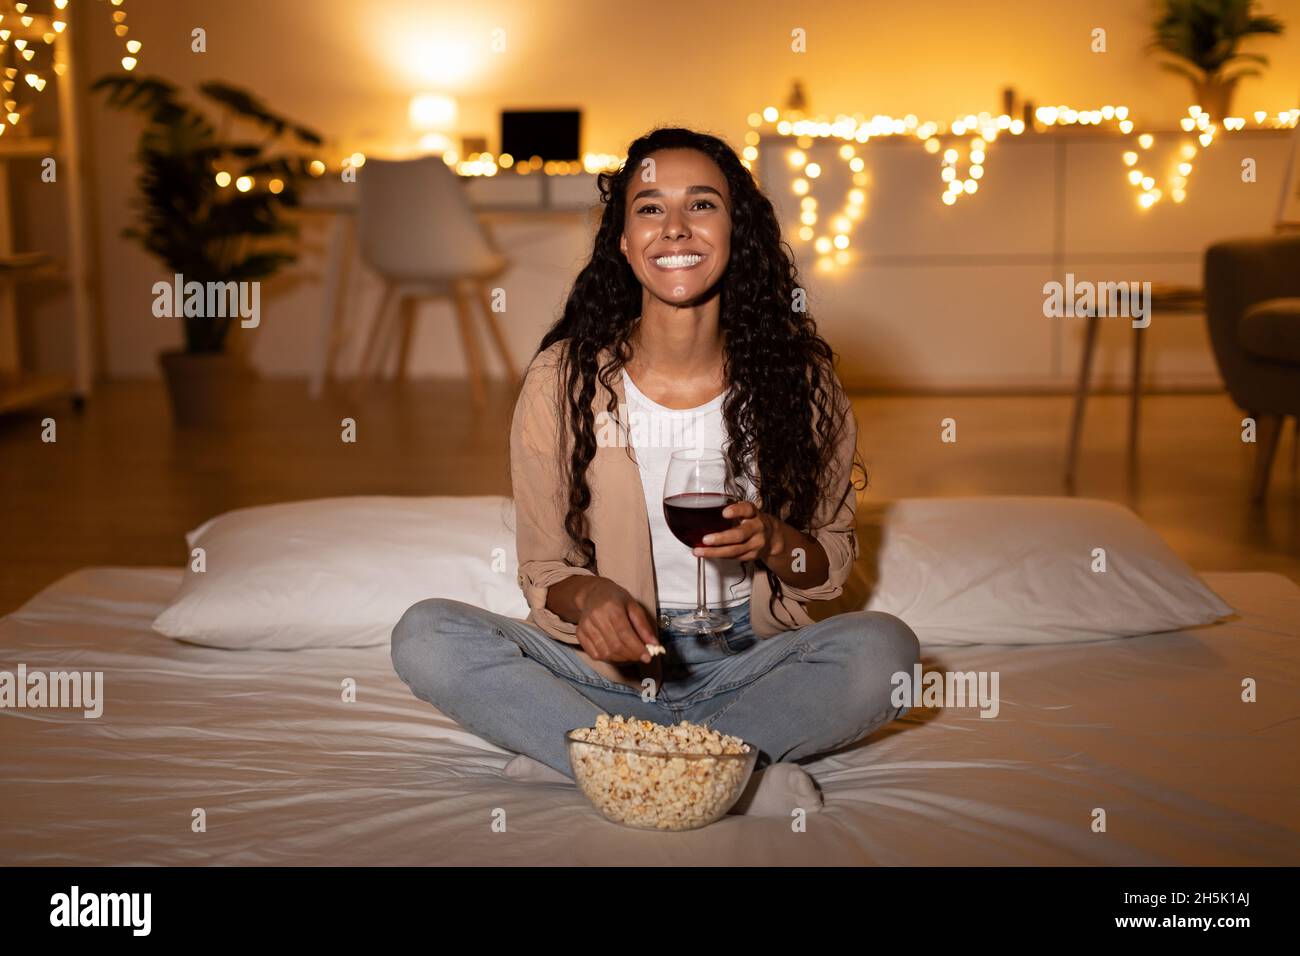 Happy Evening Alone. Joyful Female Drinking Wine And Eating Popcorn Watching Film Sitting On Bed At Home, Smiling To Camera. Cozy Domestic Weekend Lei Stock Photo